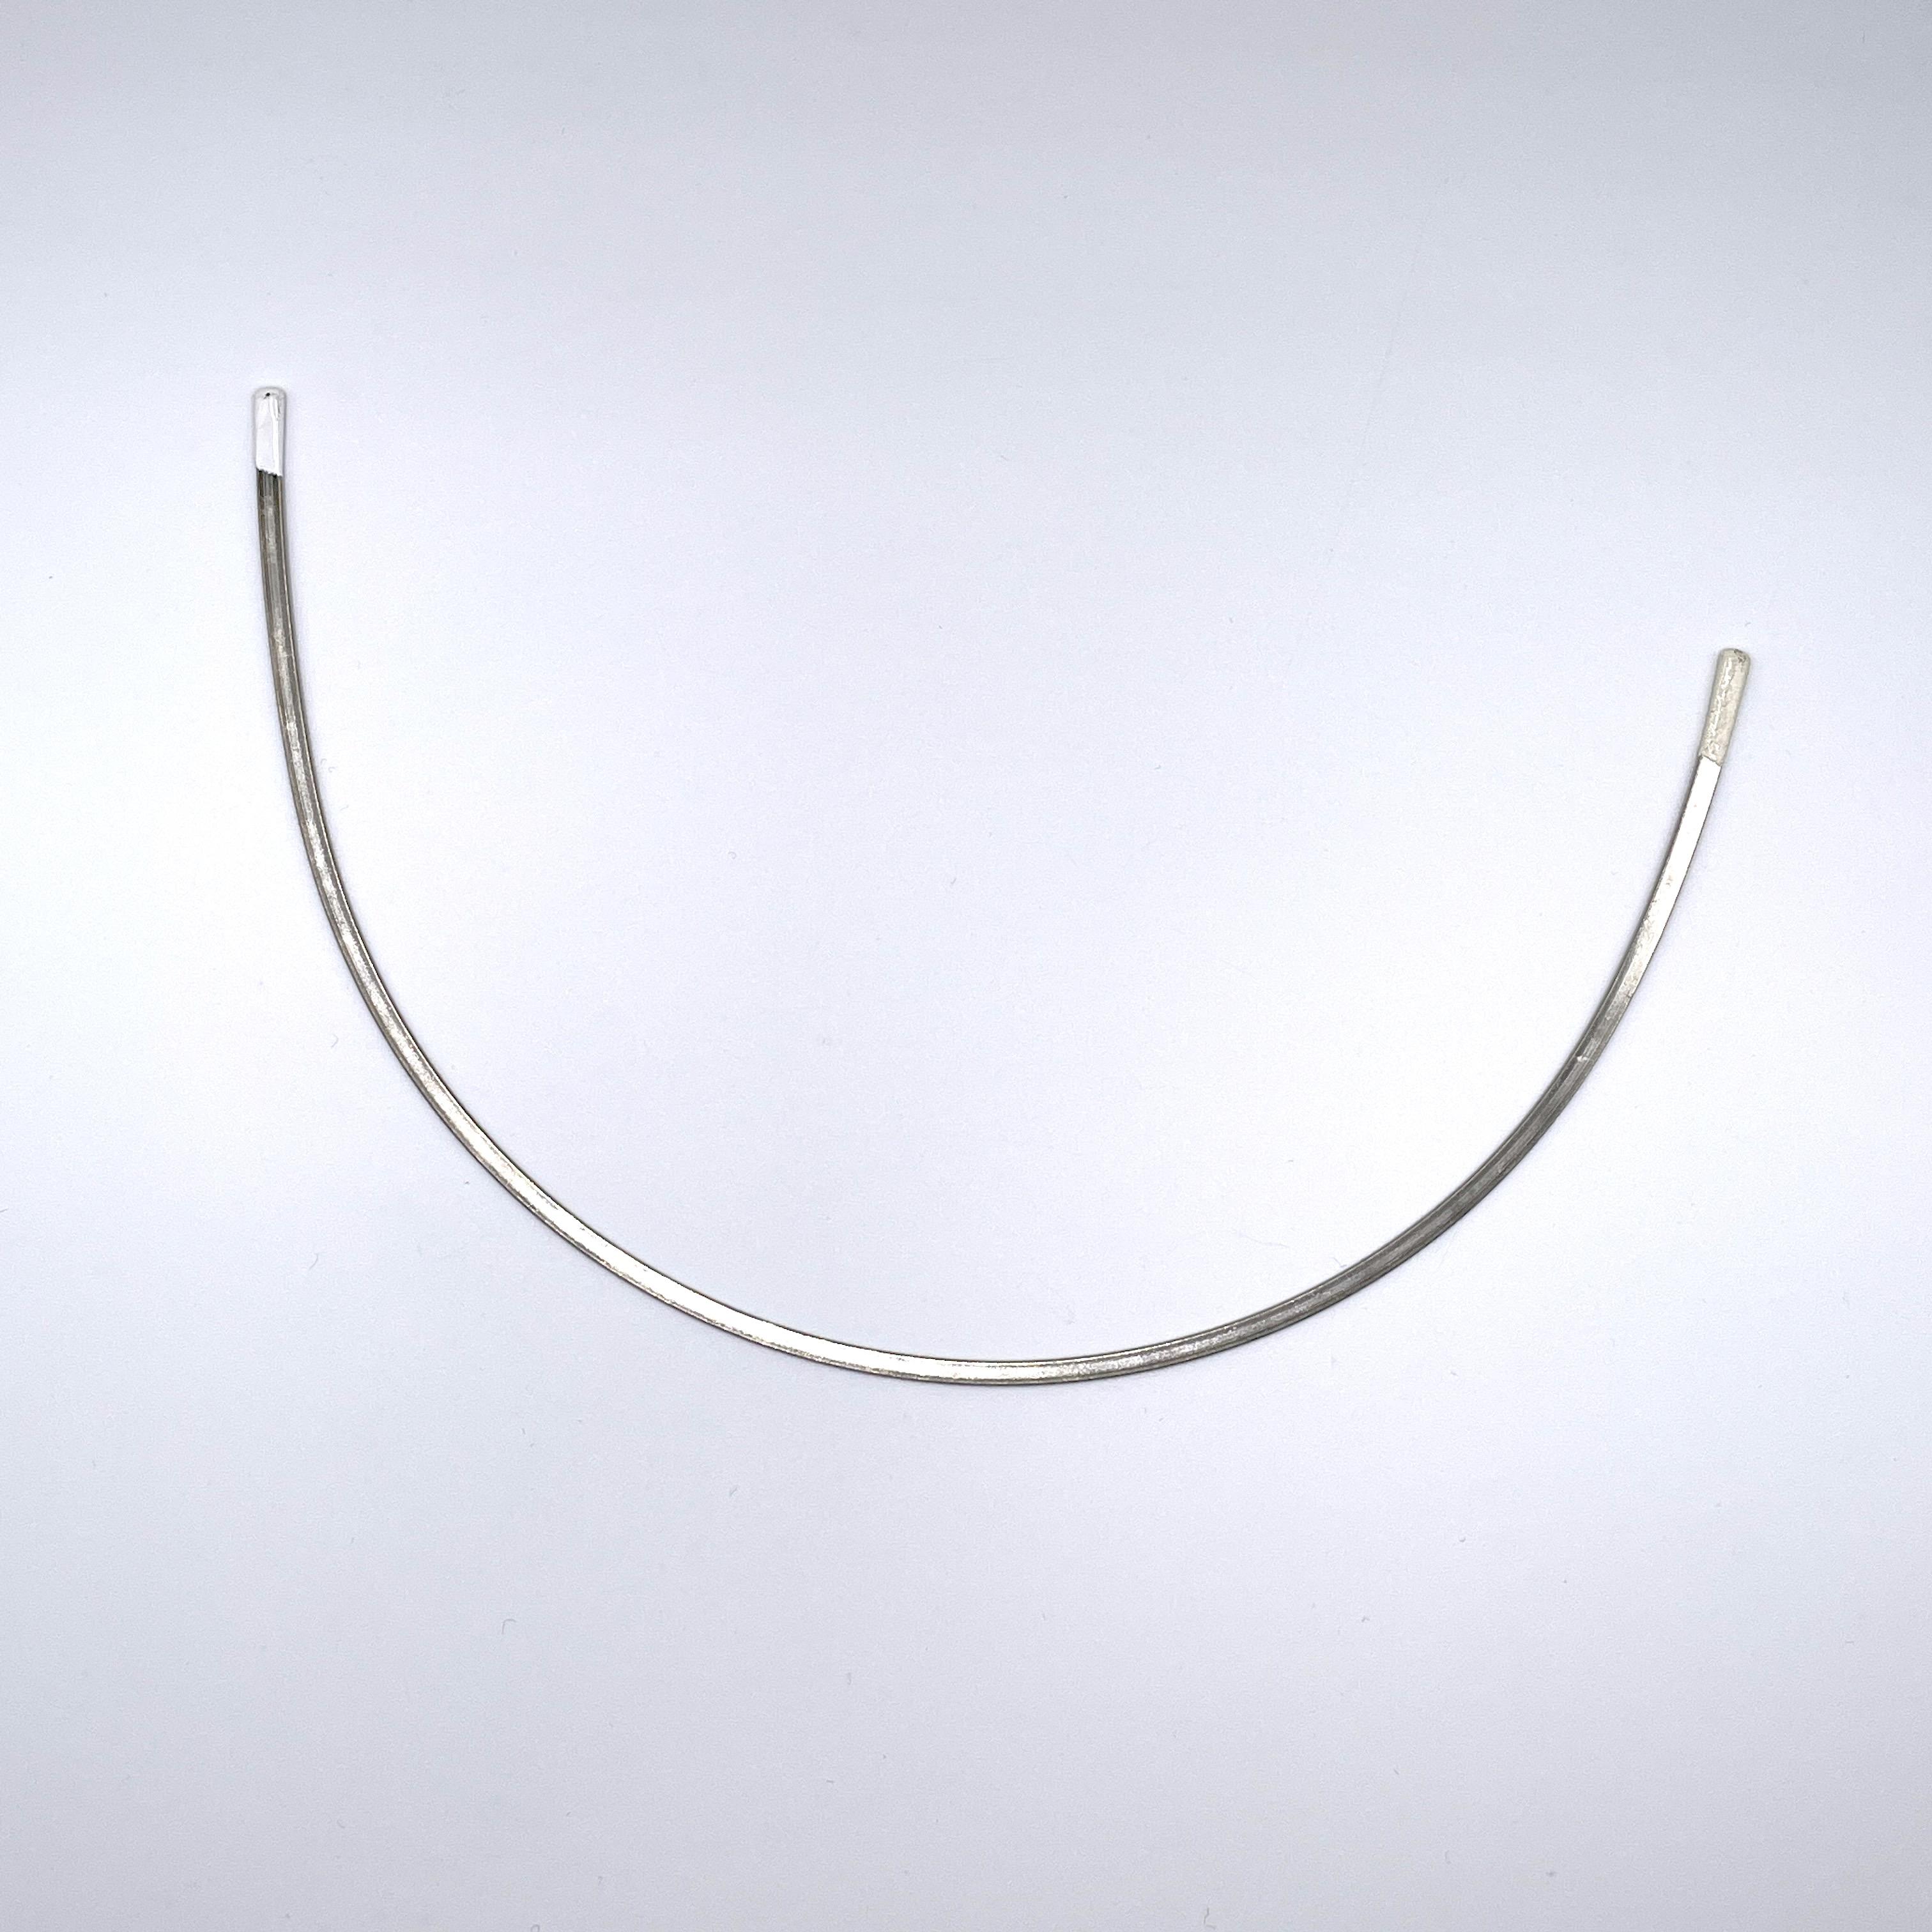 Stainless Steel Bra Wire with Plastic-Coated End Tip for Bras Bustiers  Corsets